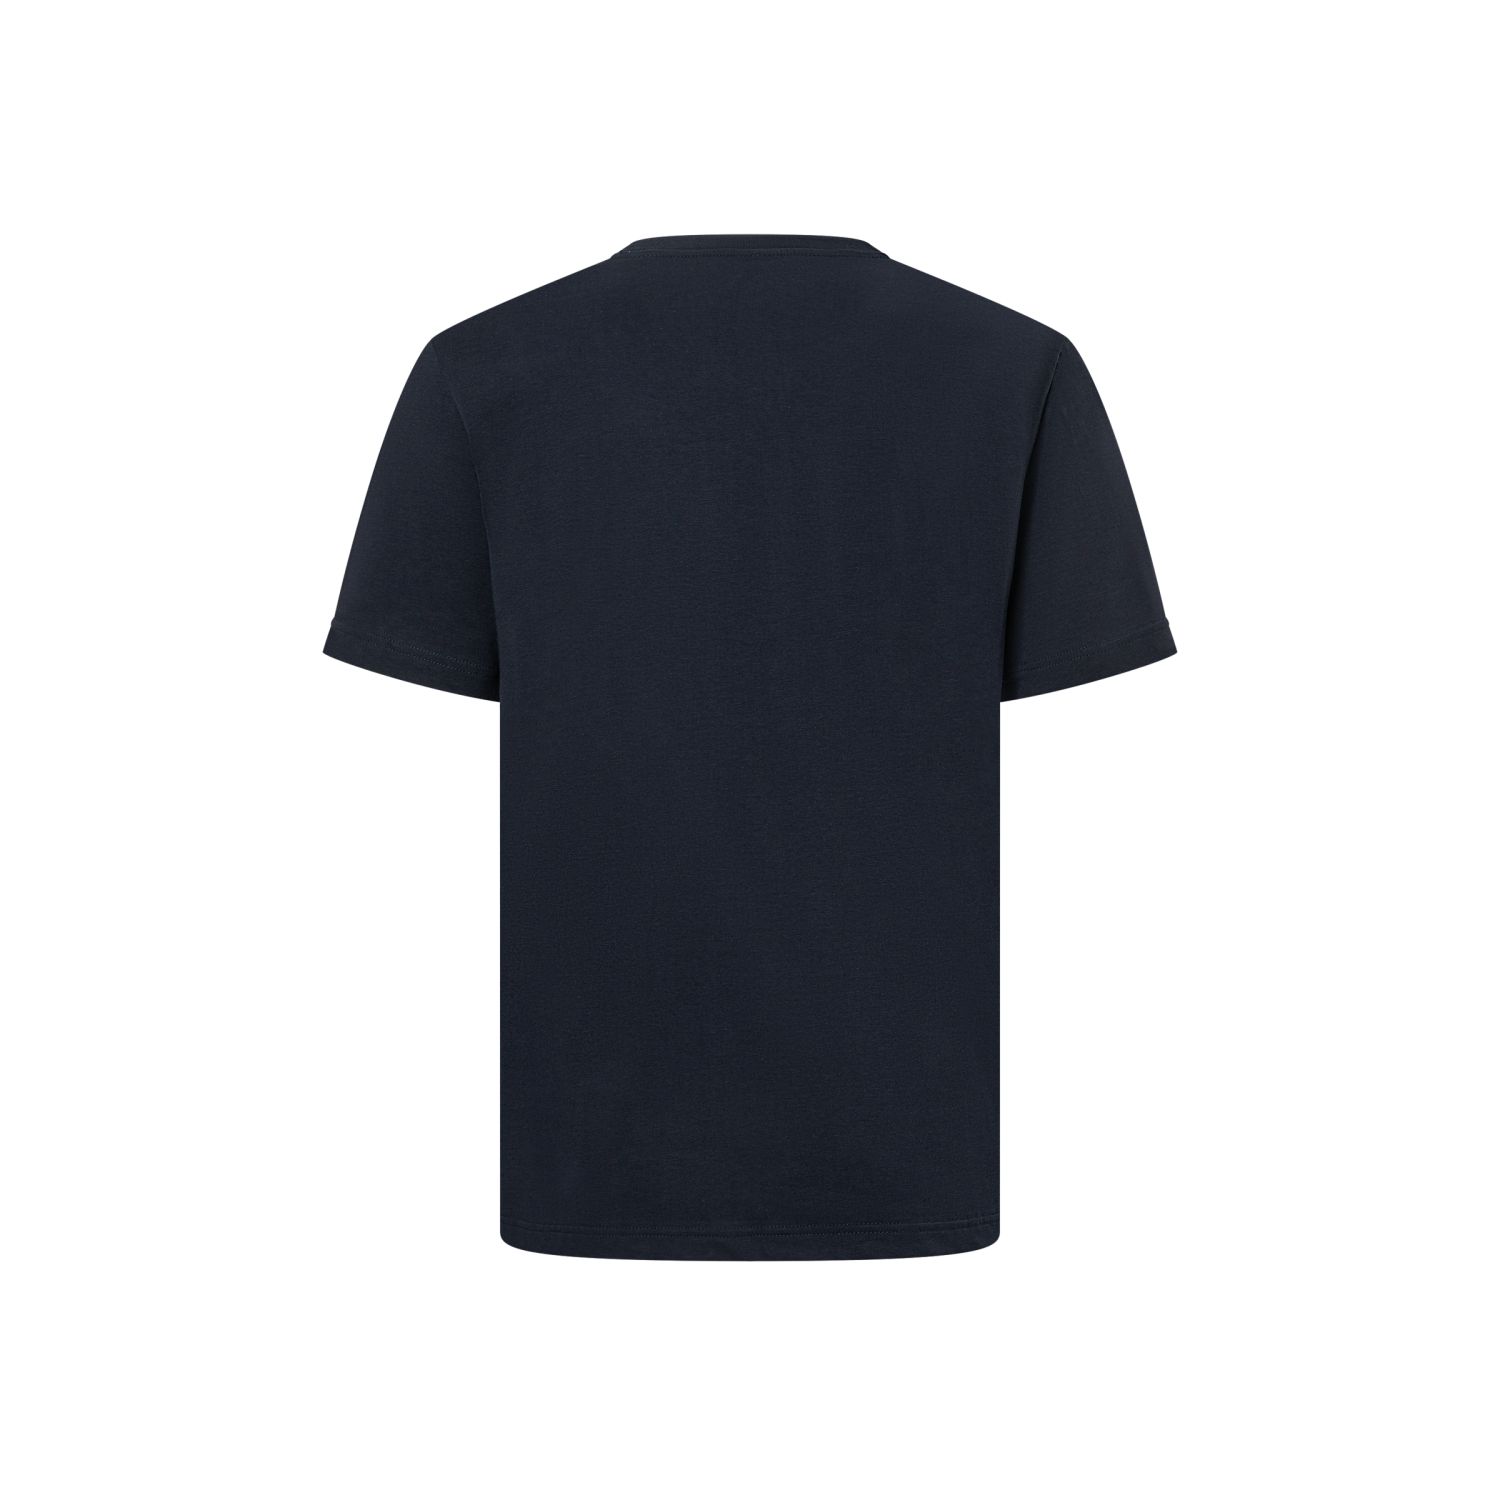 T-Shirts & Polo -  bogner fire and ice MATTEO T-Shirt